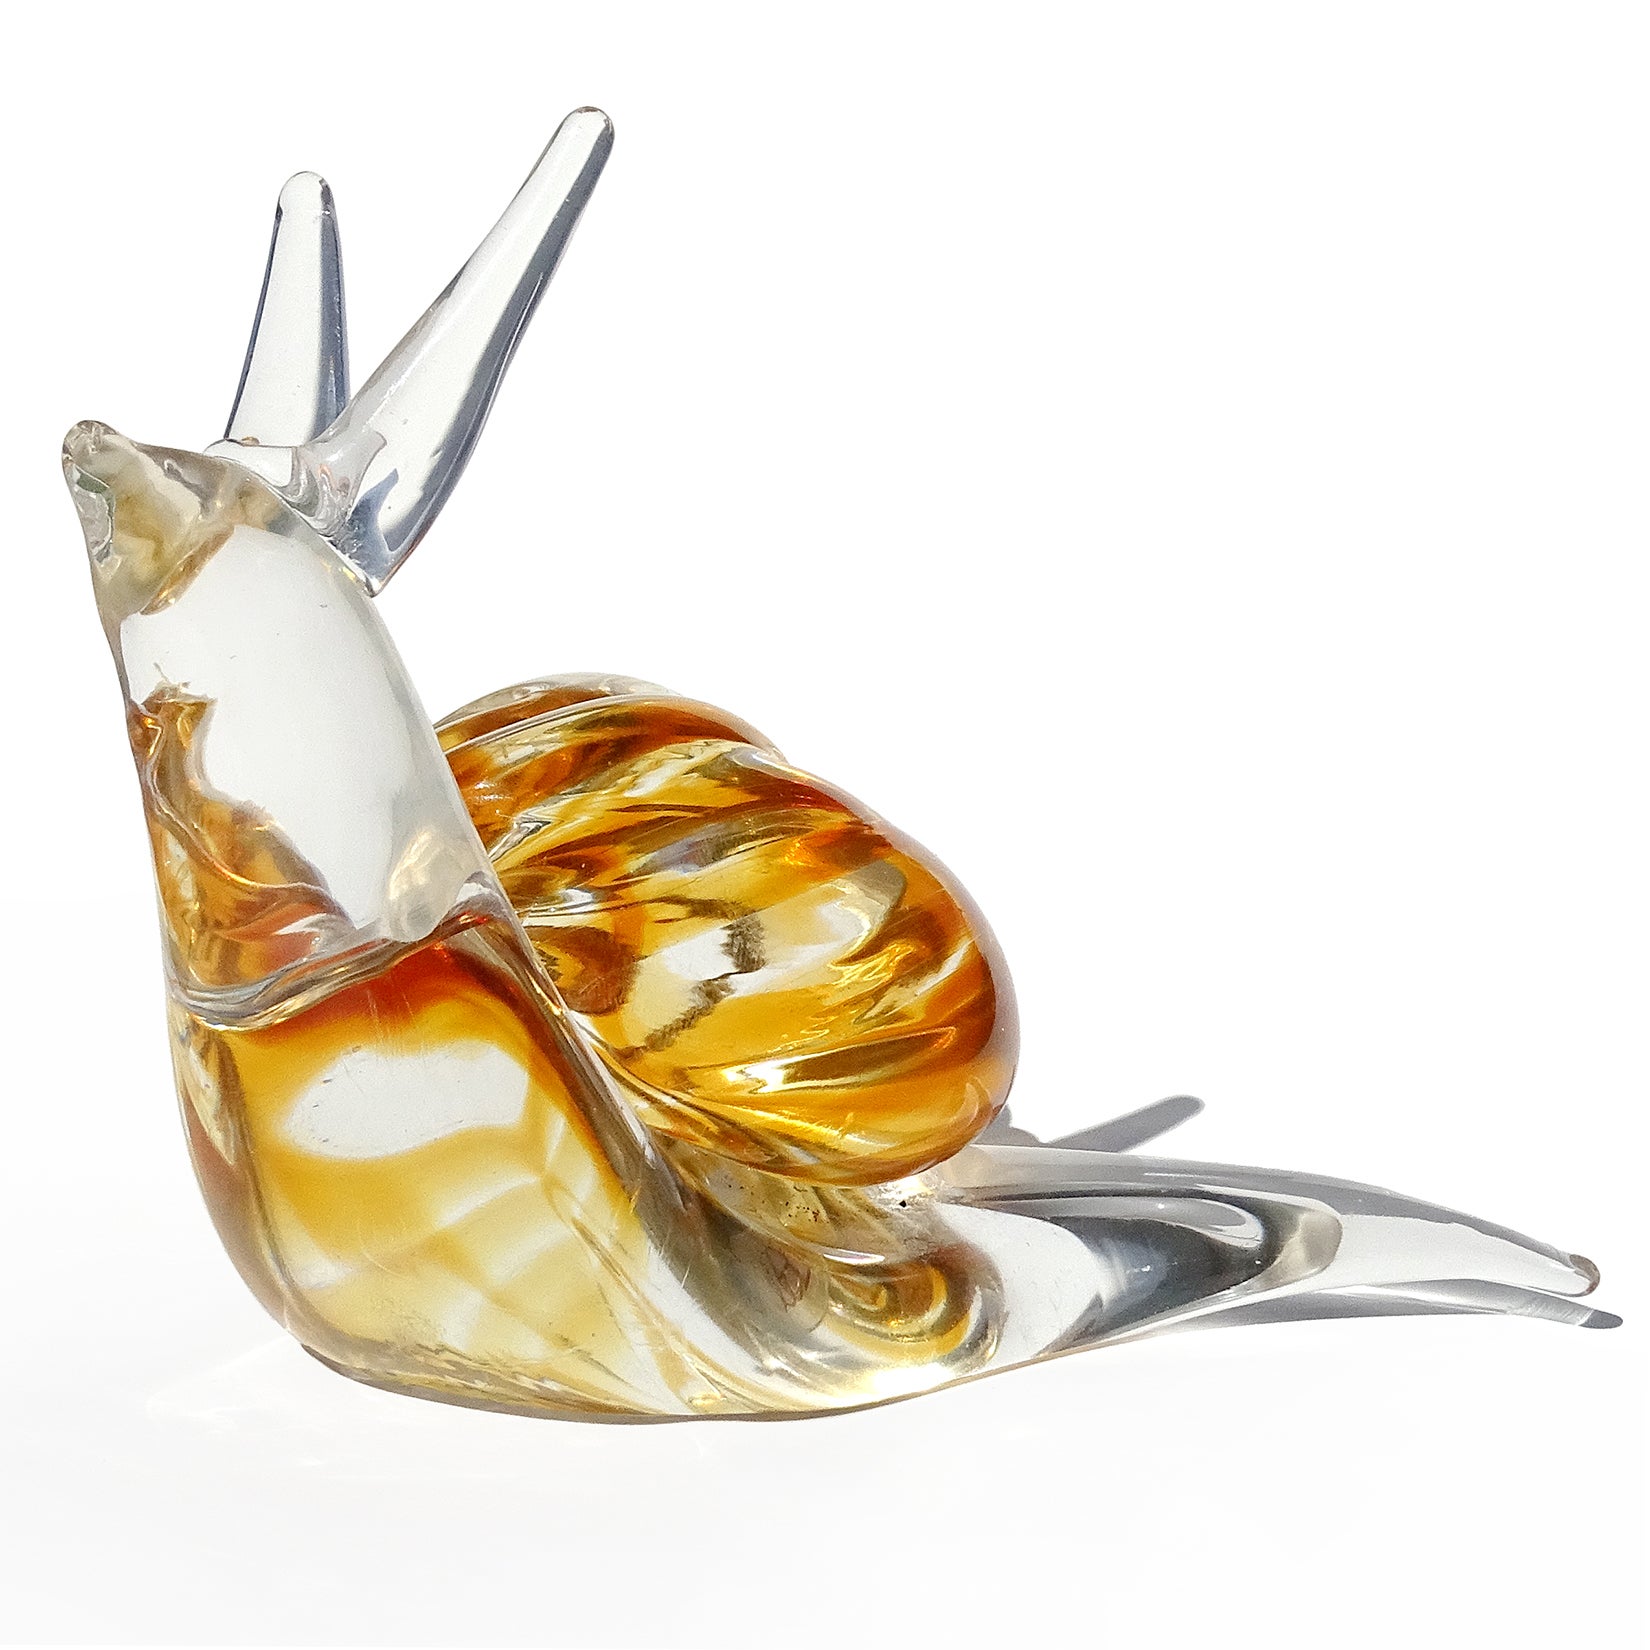 Priced per item (2 emails available). Beautiful, vintage Murano clear glass and orange swirl seashell Italian art glass snail sculpture / paperweight. One of the snails has an original Oggetti label underneath. Would make a great display piece on